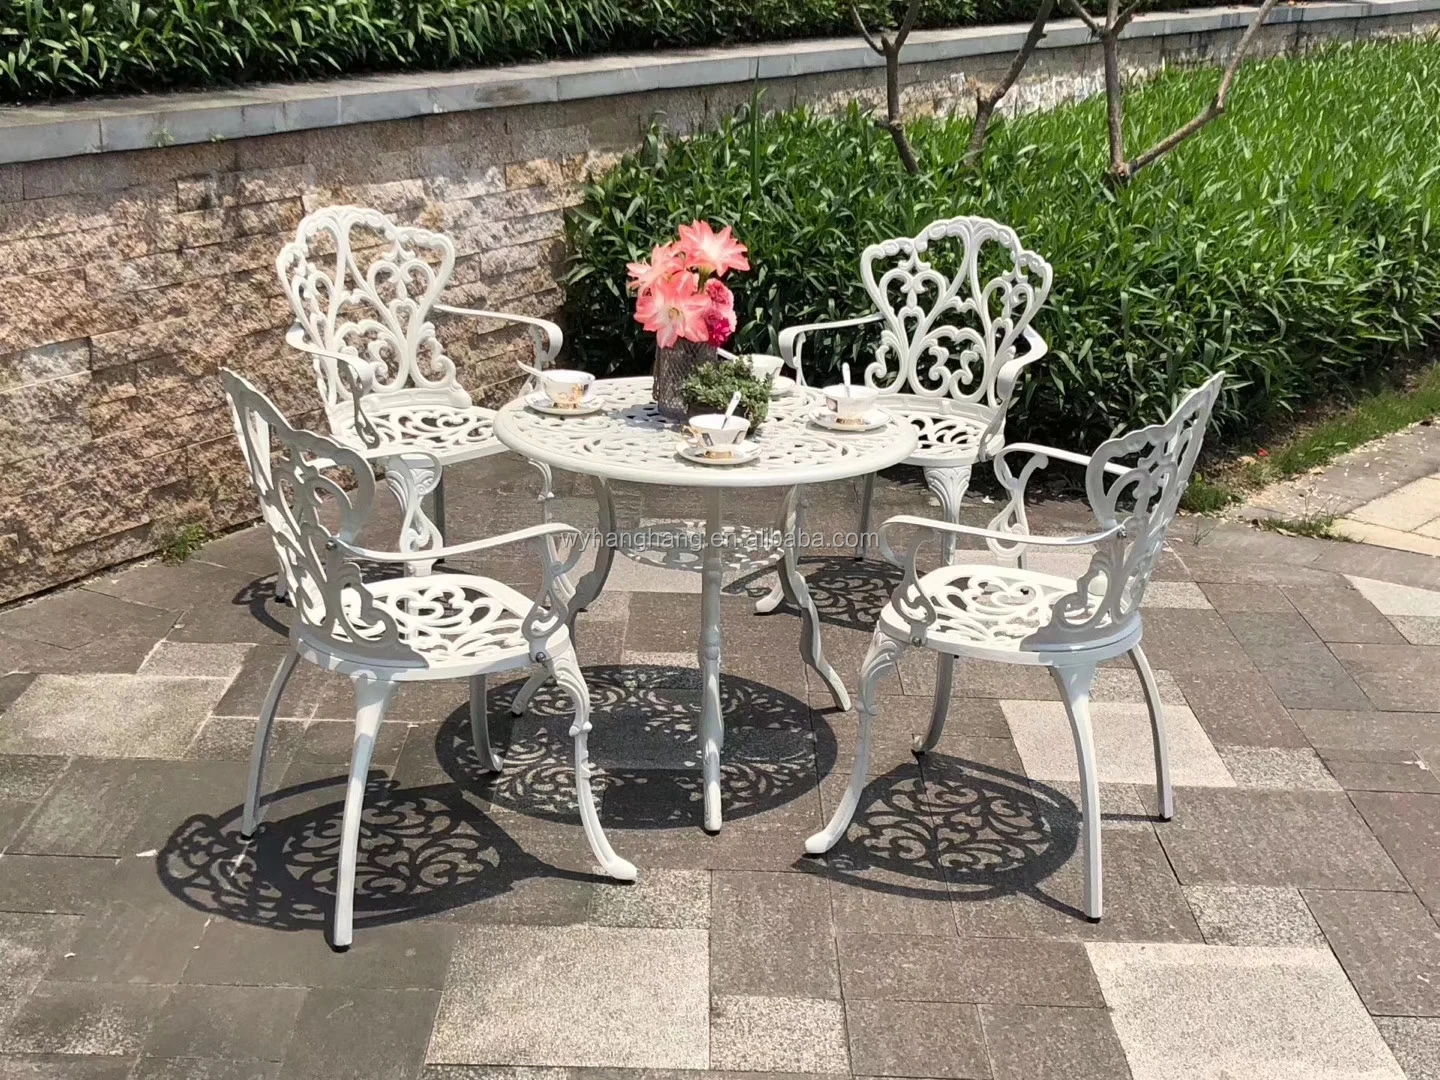 Details about   Outdoor Bistro Set Garden Patio Table Chairs/Bench Furniture Cast Aluminium 